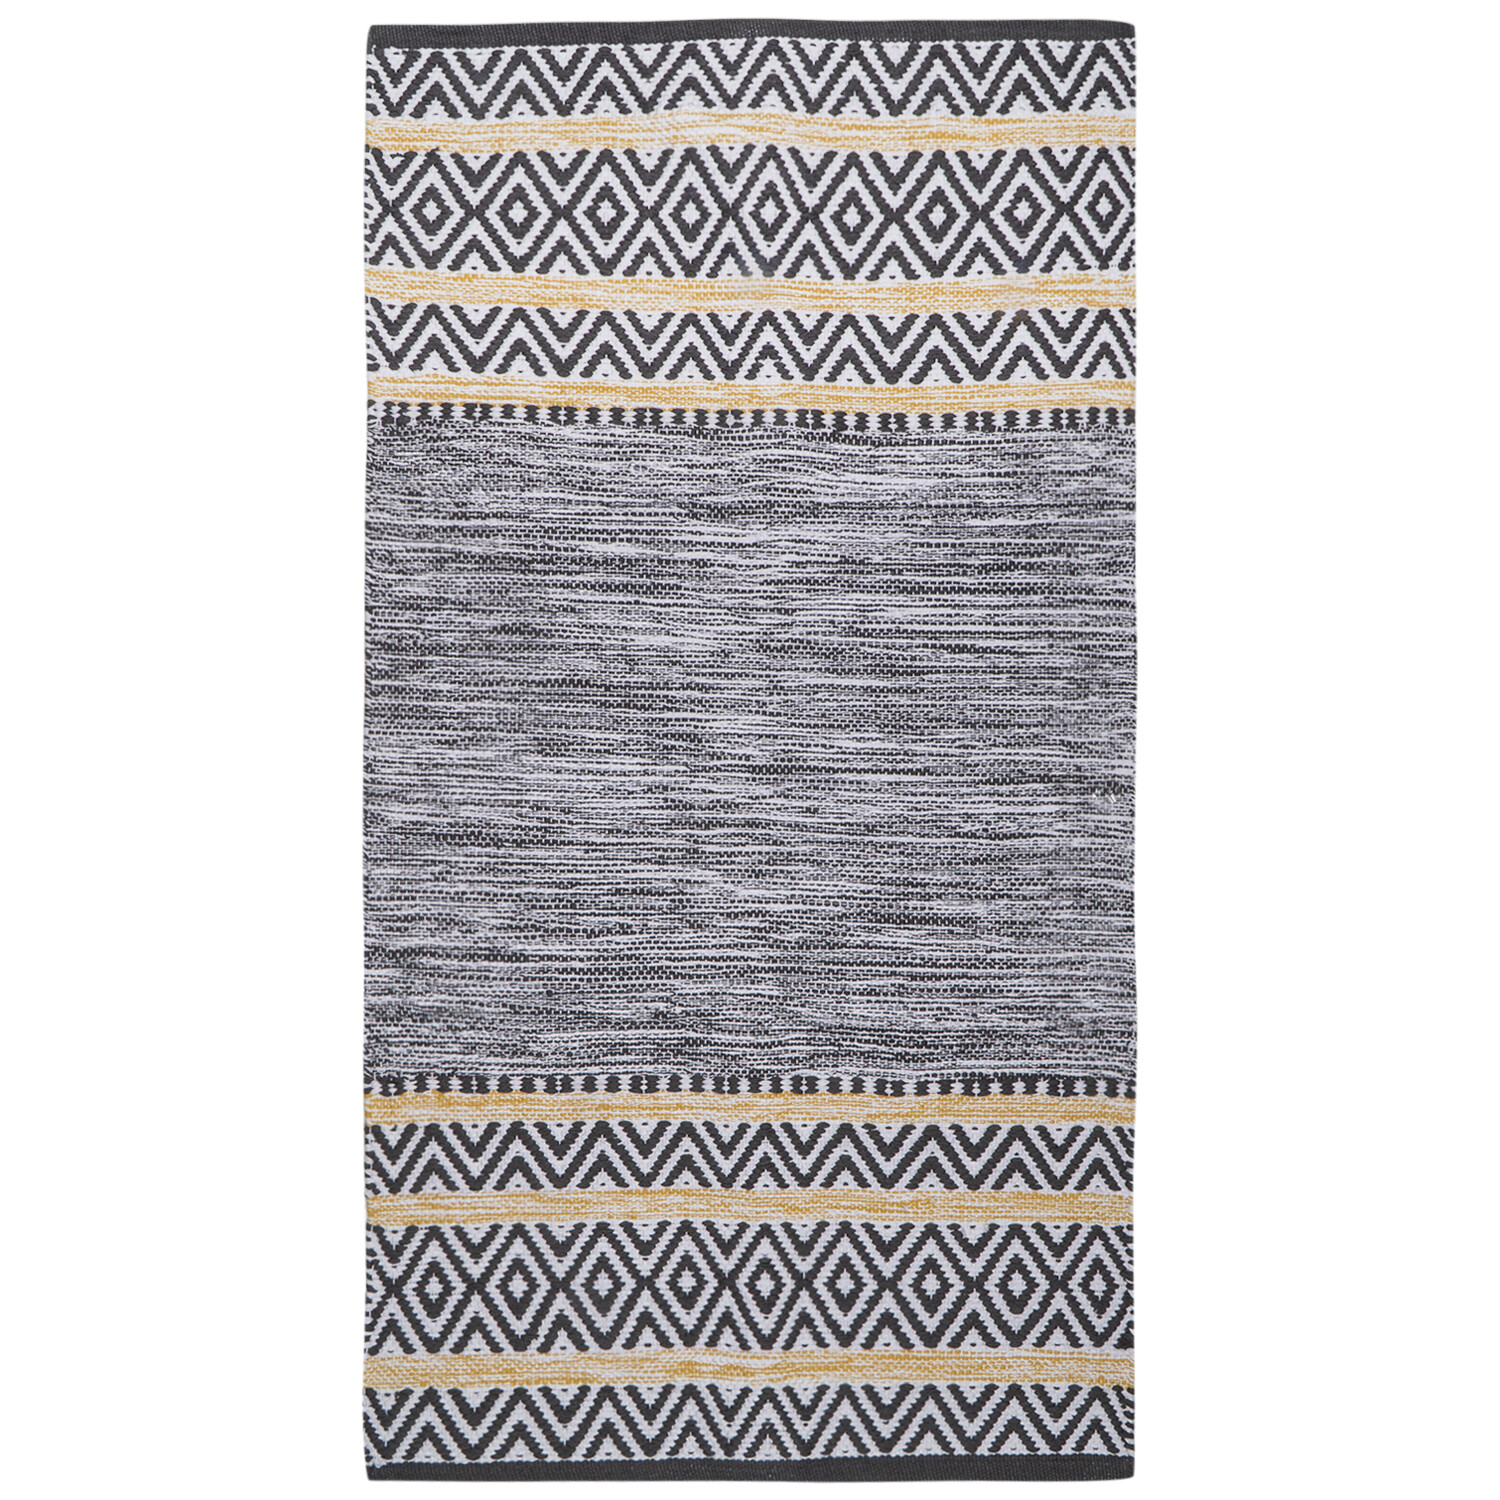 Crysta Rug  - Monochrome with ochre / Large Image